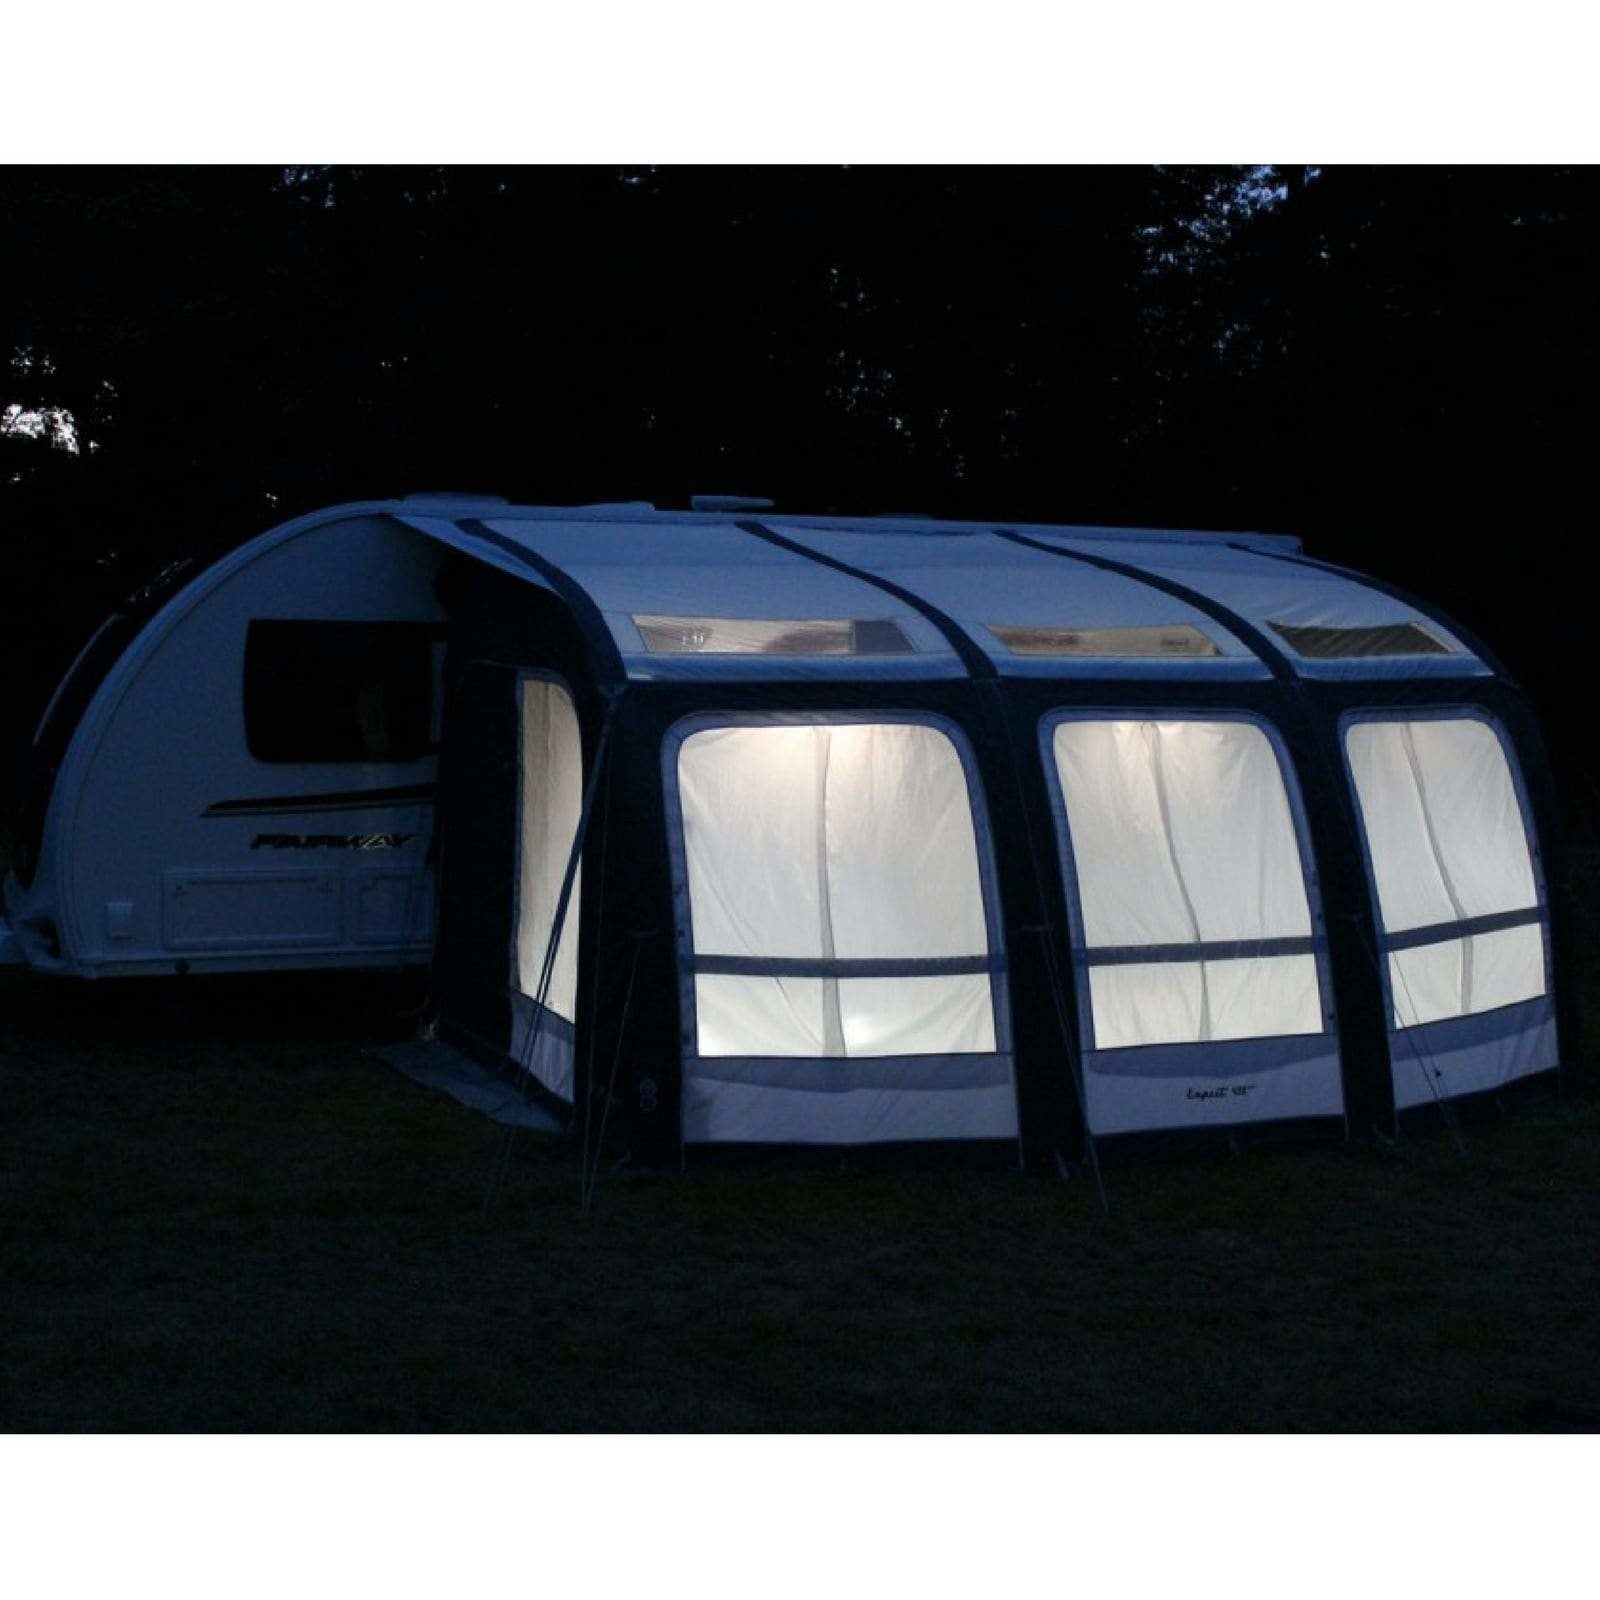 Outdoor Revolution Lumi-Link Tube Light Kit OR18025 (2019) made by Outdoor Revolution. A Accessories sold by Quality Caravan Awnings